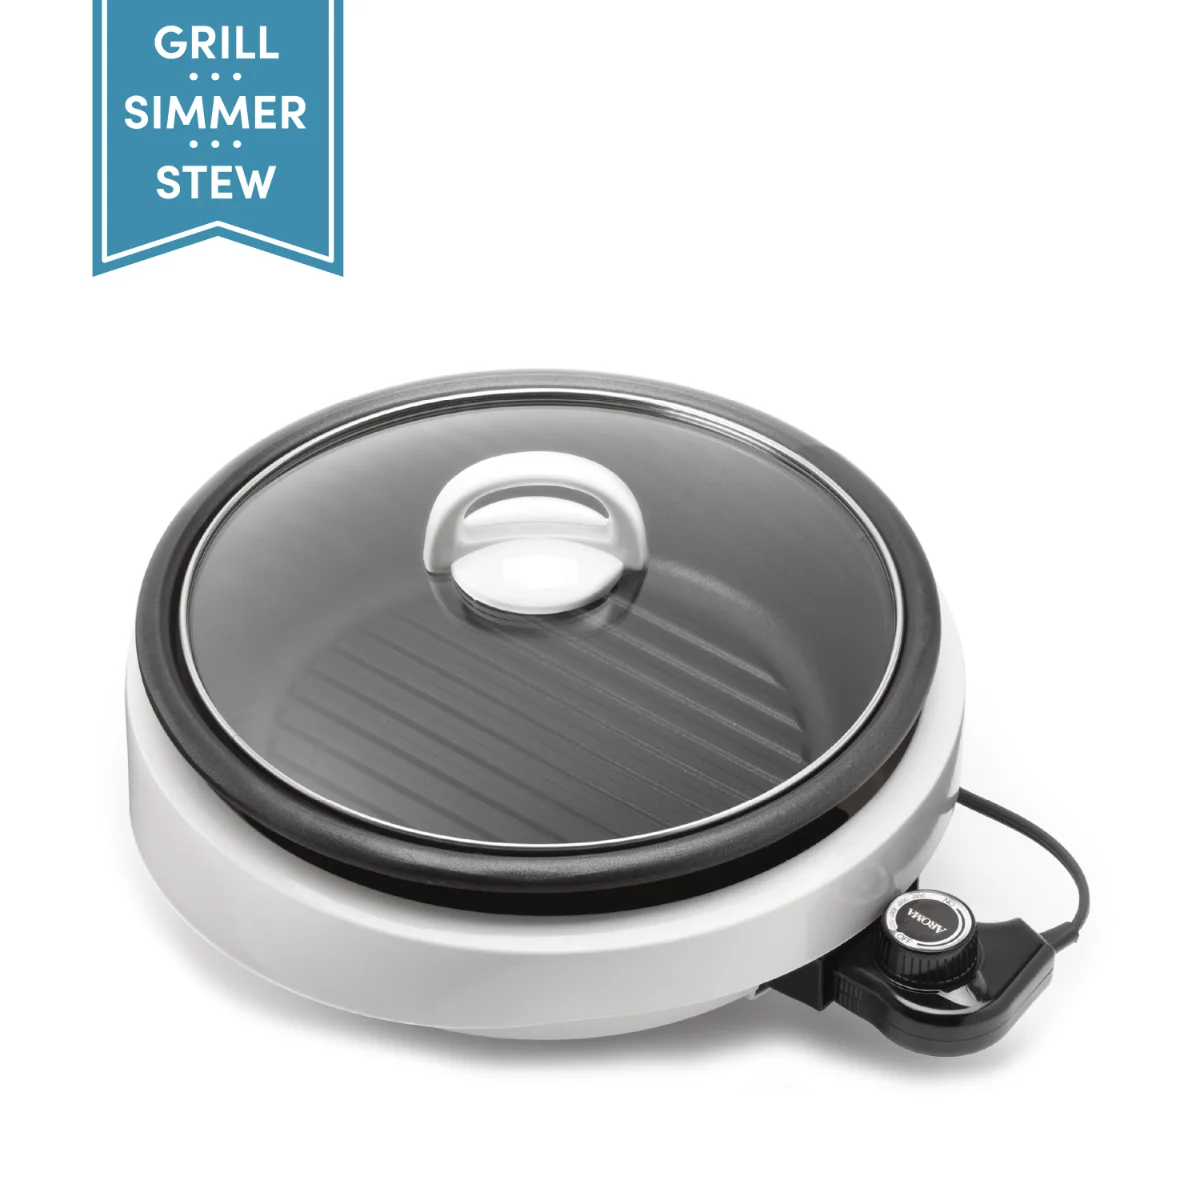 

3Qt. Grillet® 3-in-1 Electric Indoor Grill - White